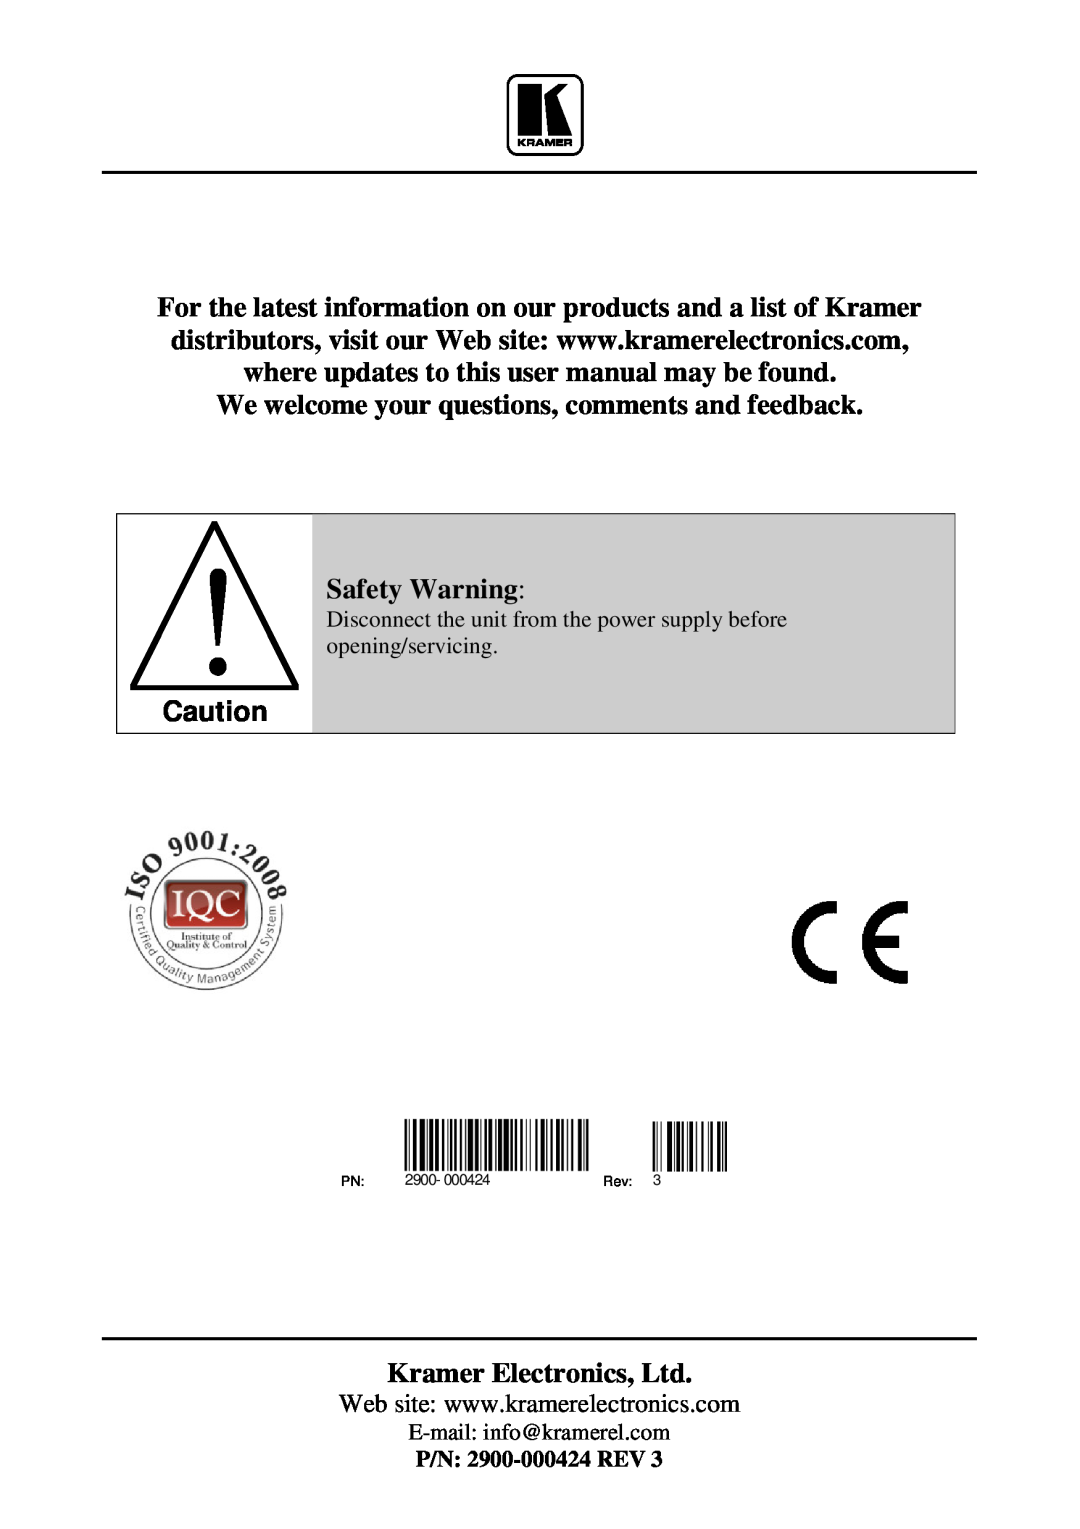 Kramer Electronics TP-45 We welcome your questions, comments and feedback Safety Warning, E-mail info@kramerel.com, 2900 